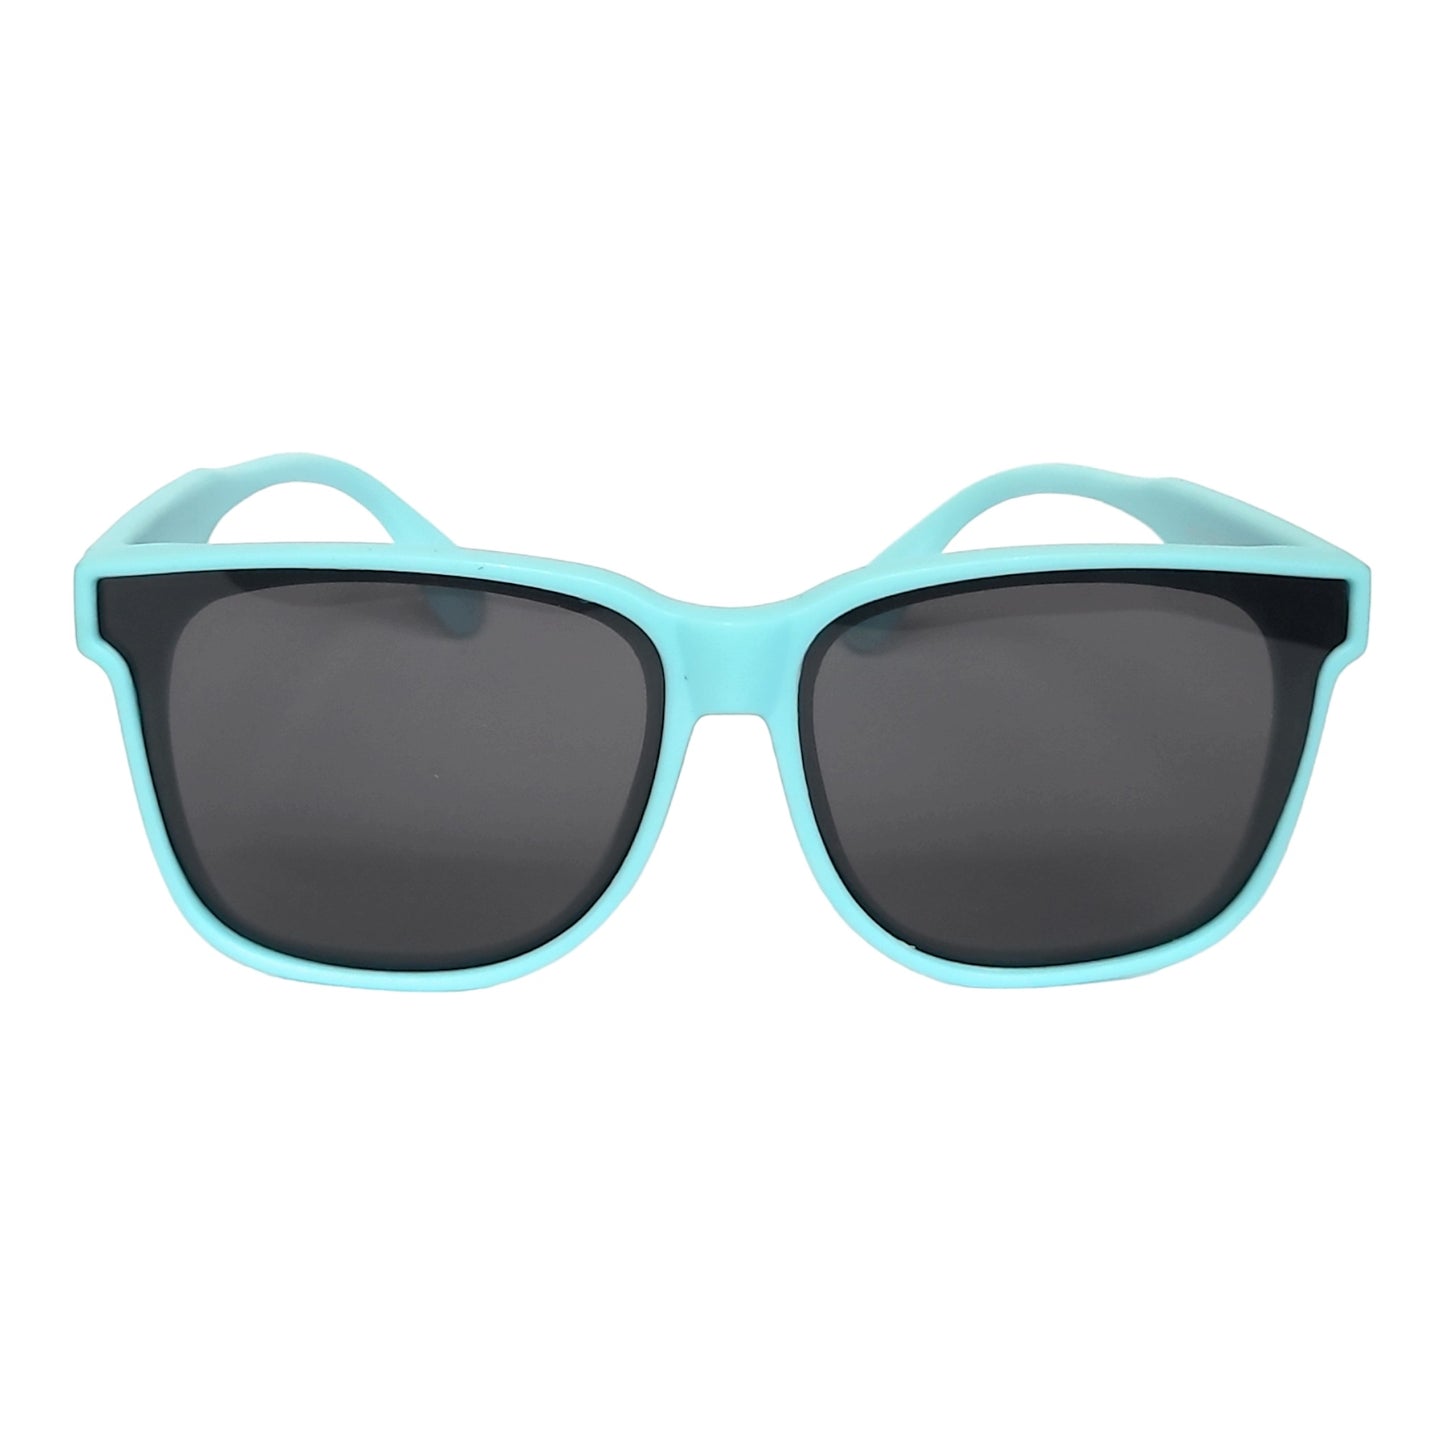 Kids Polarized Sunglasses for Children Age 4-9 Years Old, Girl or Boy  | affaires-9007-Blue